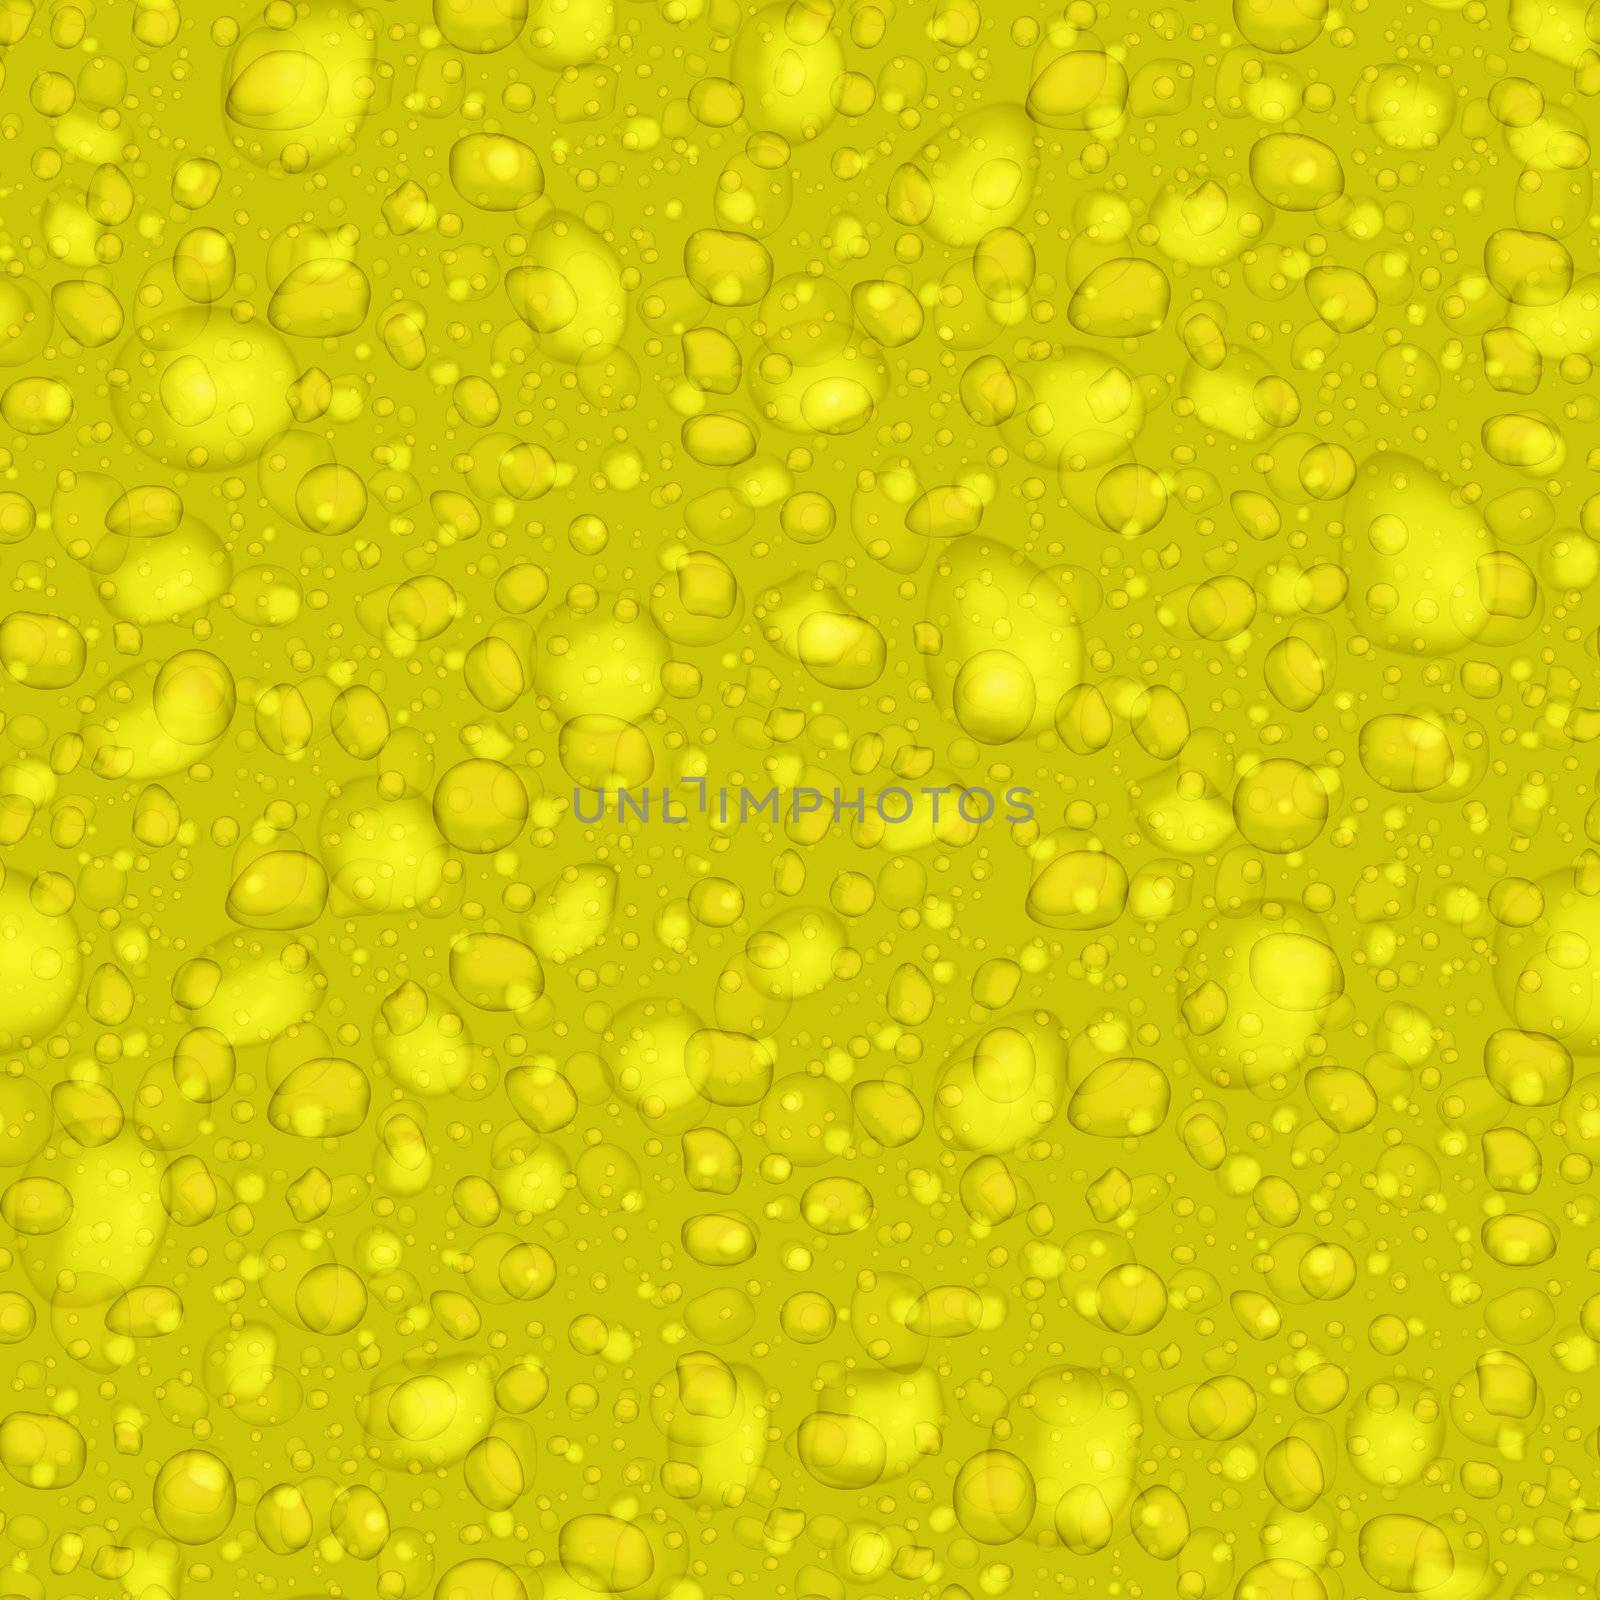 Spray of water on a yellow background - abstract seamless texture